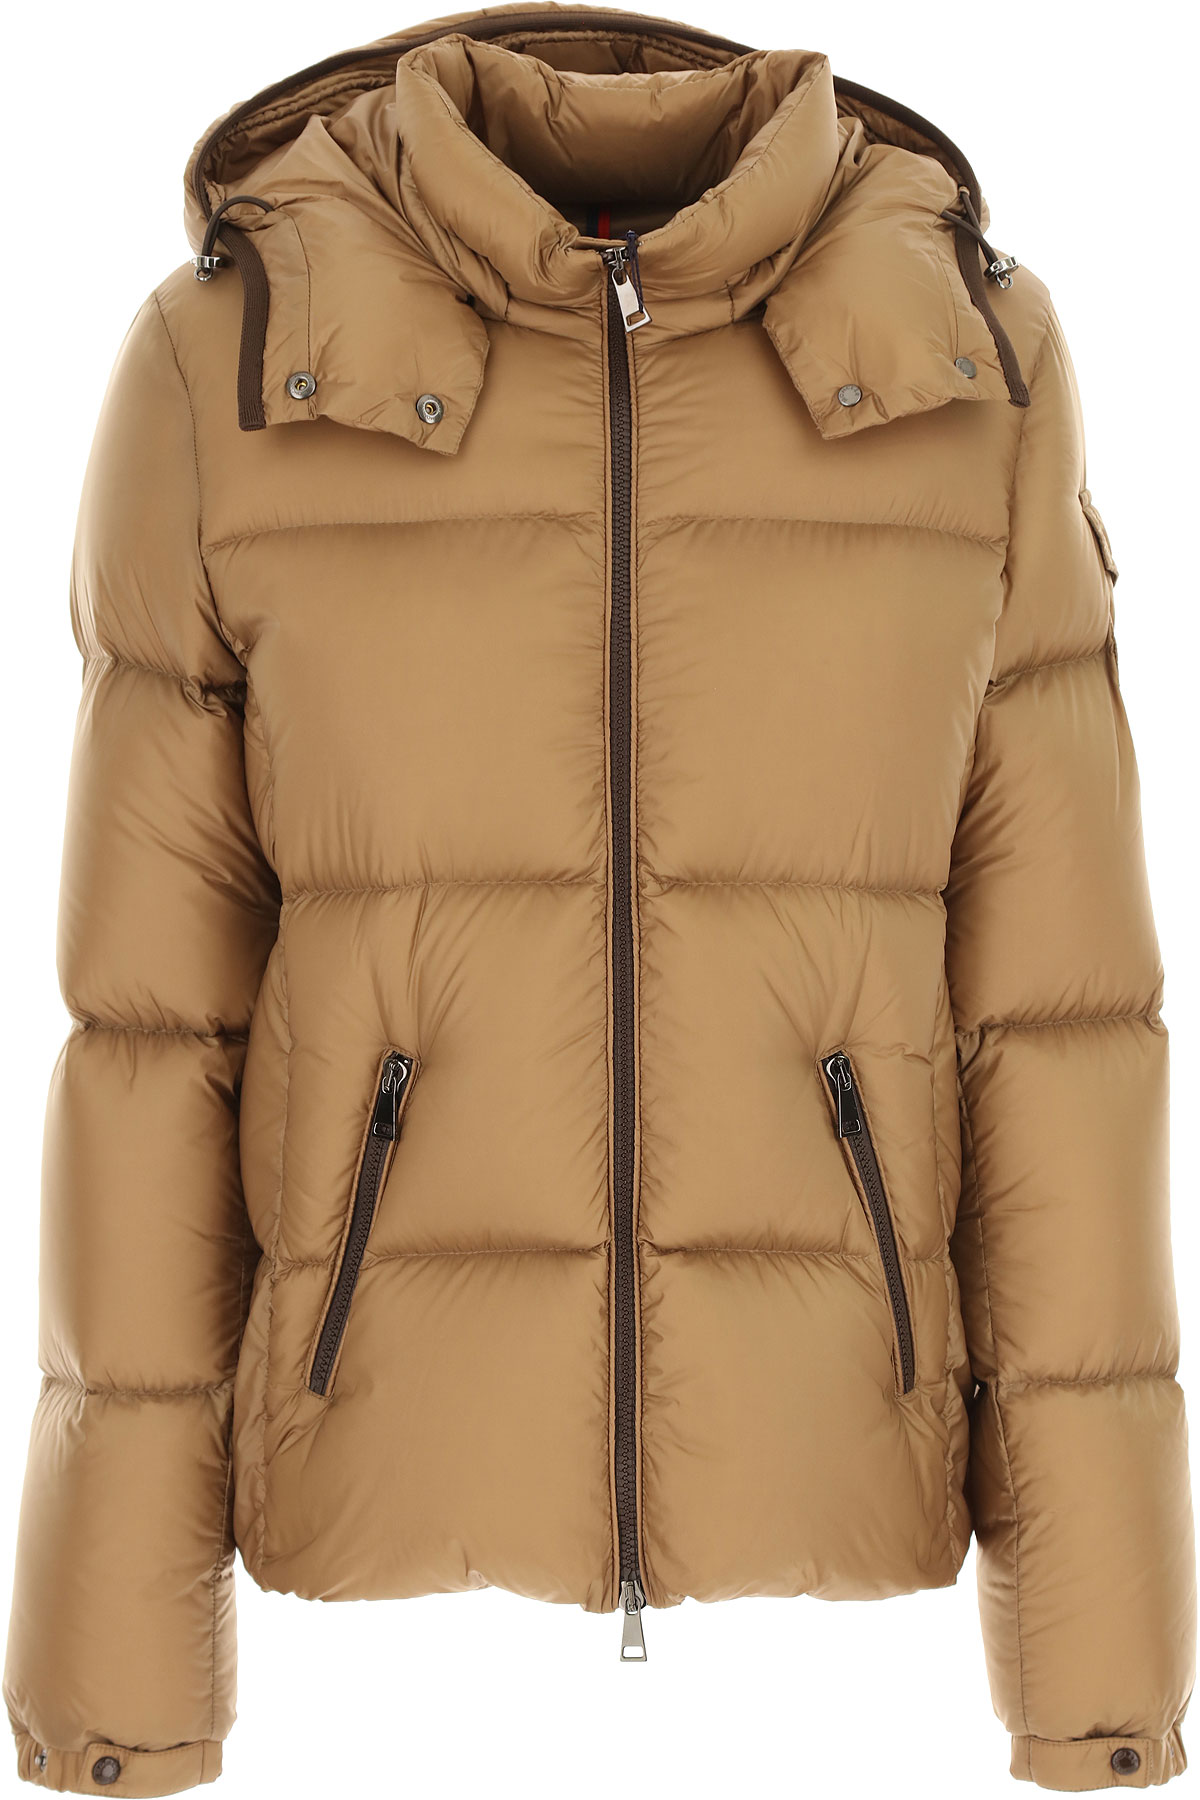 Womens Clothing Moncler, Style code: 1a58600c0229-226-